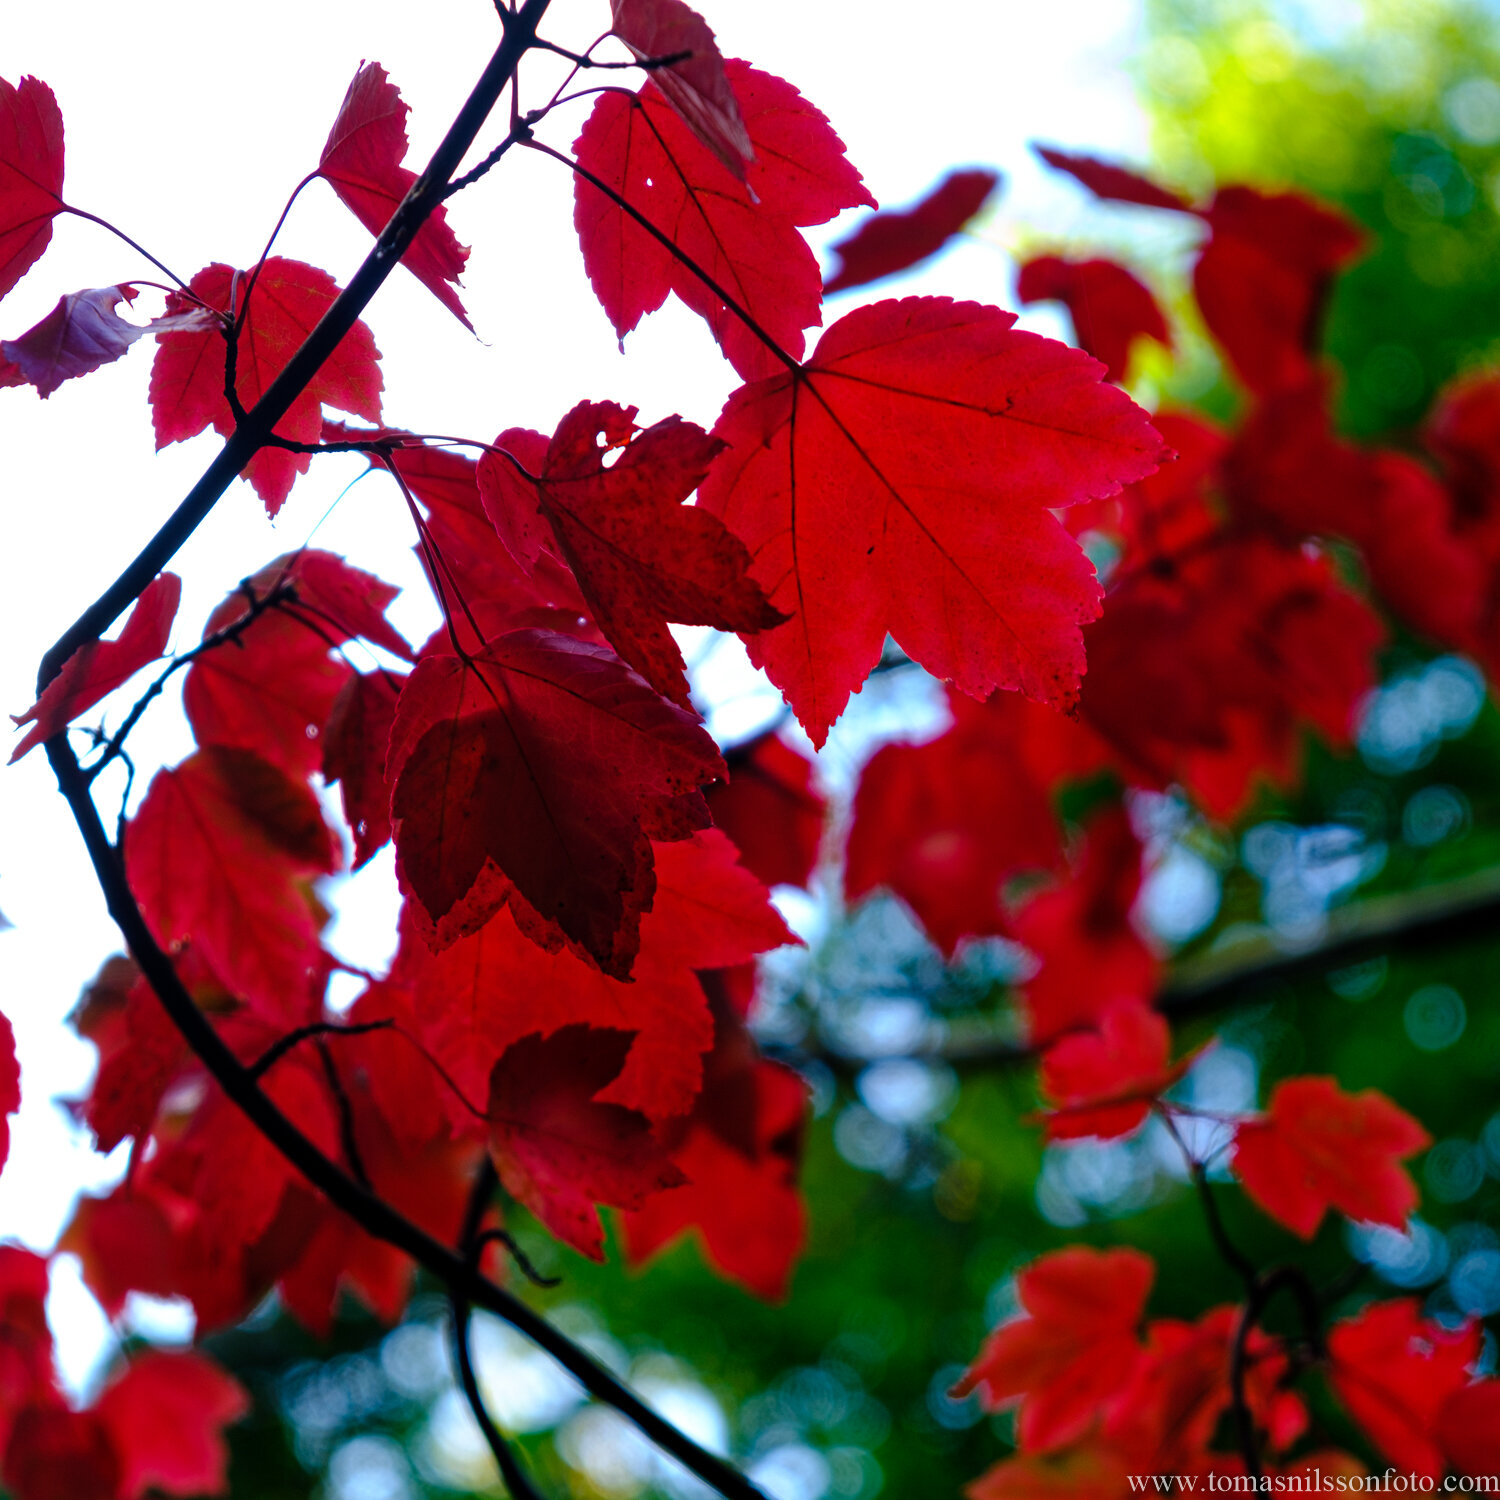 Day 284 - October 11: Maple Leaves